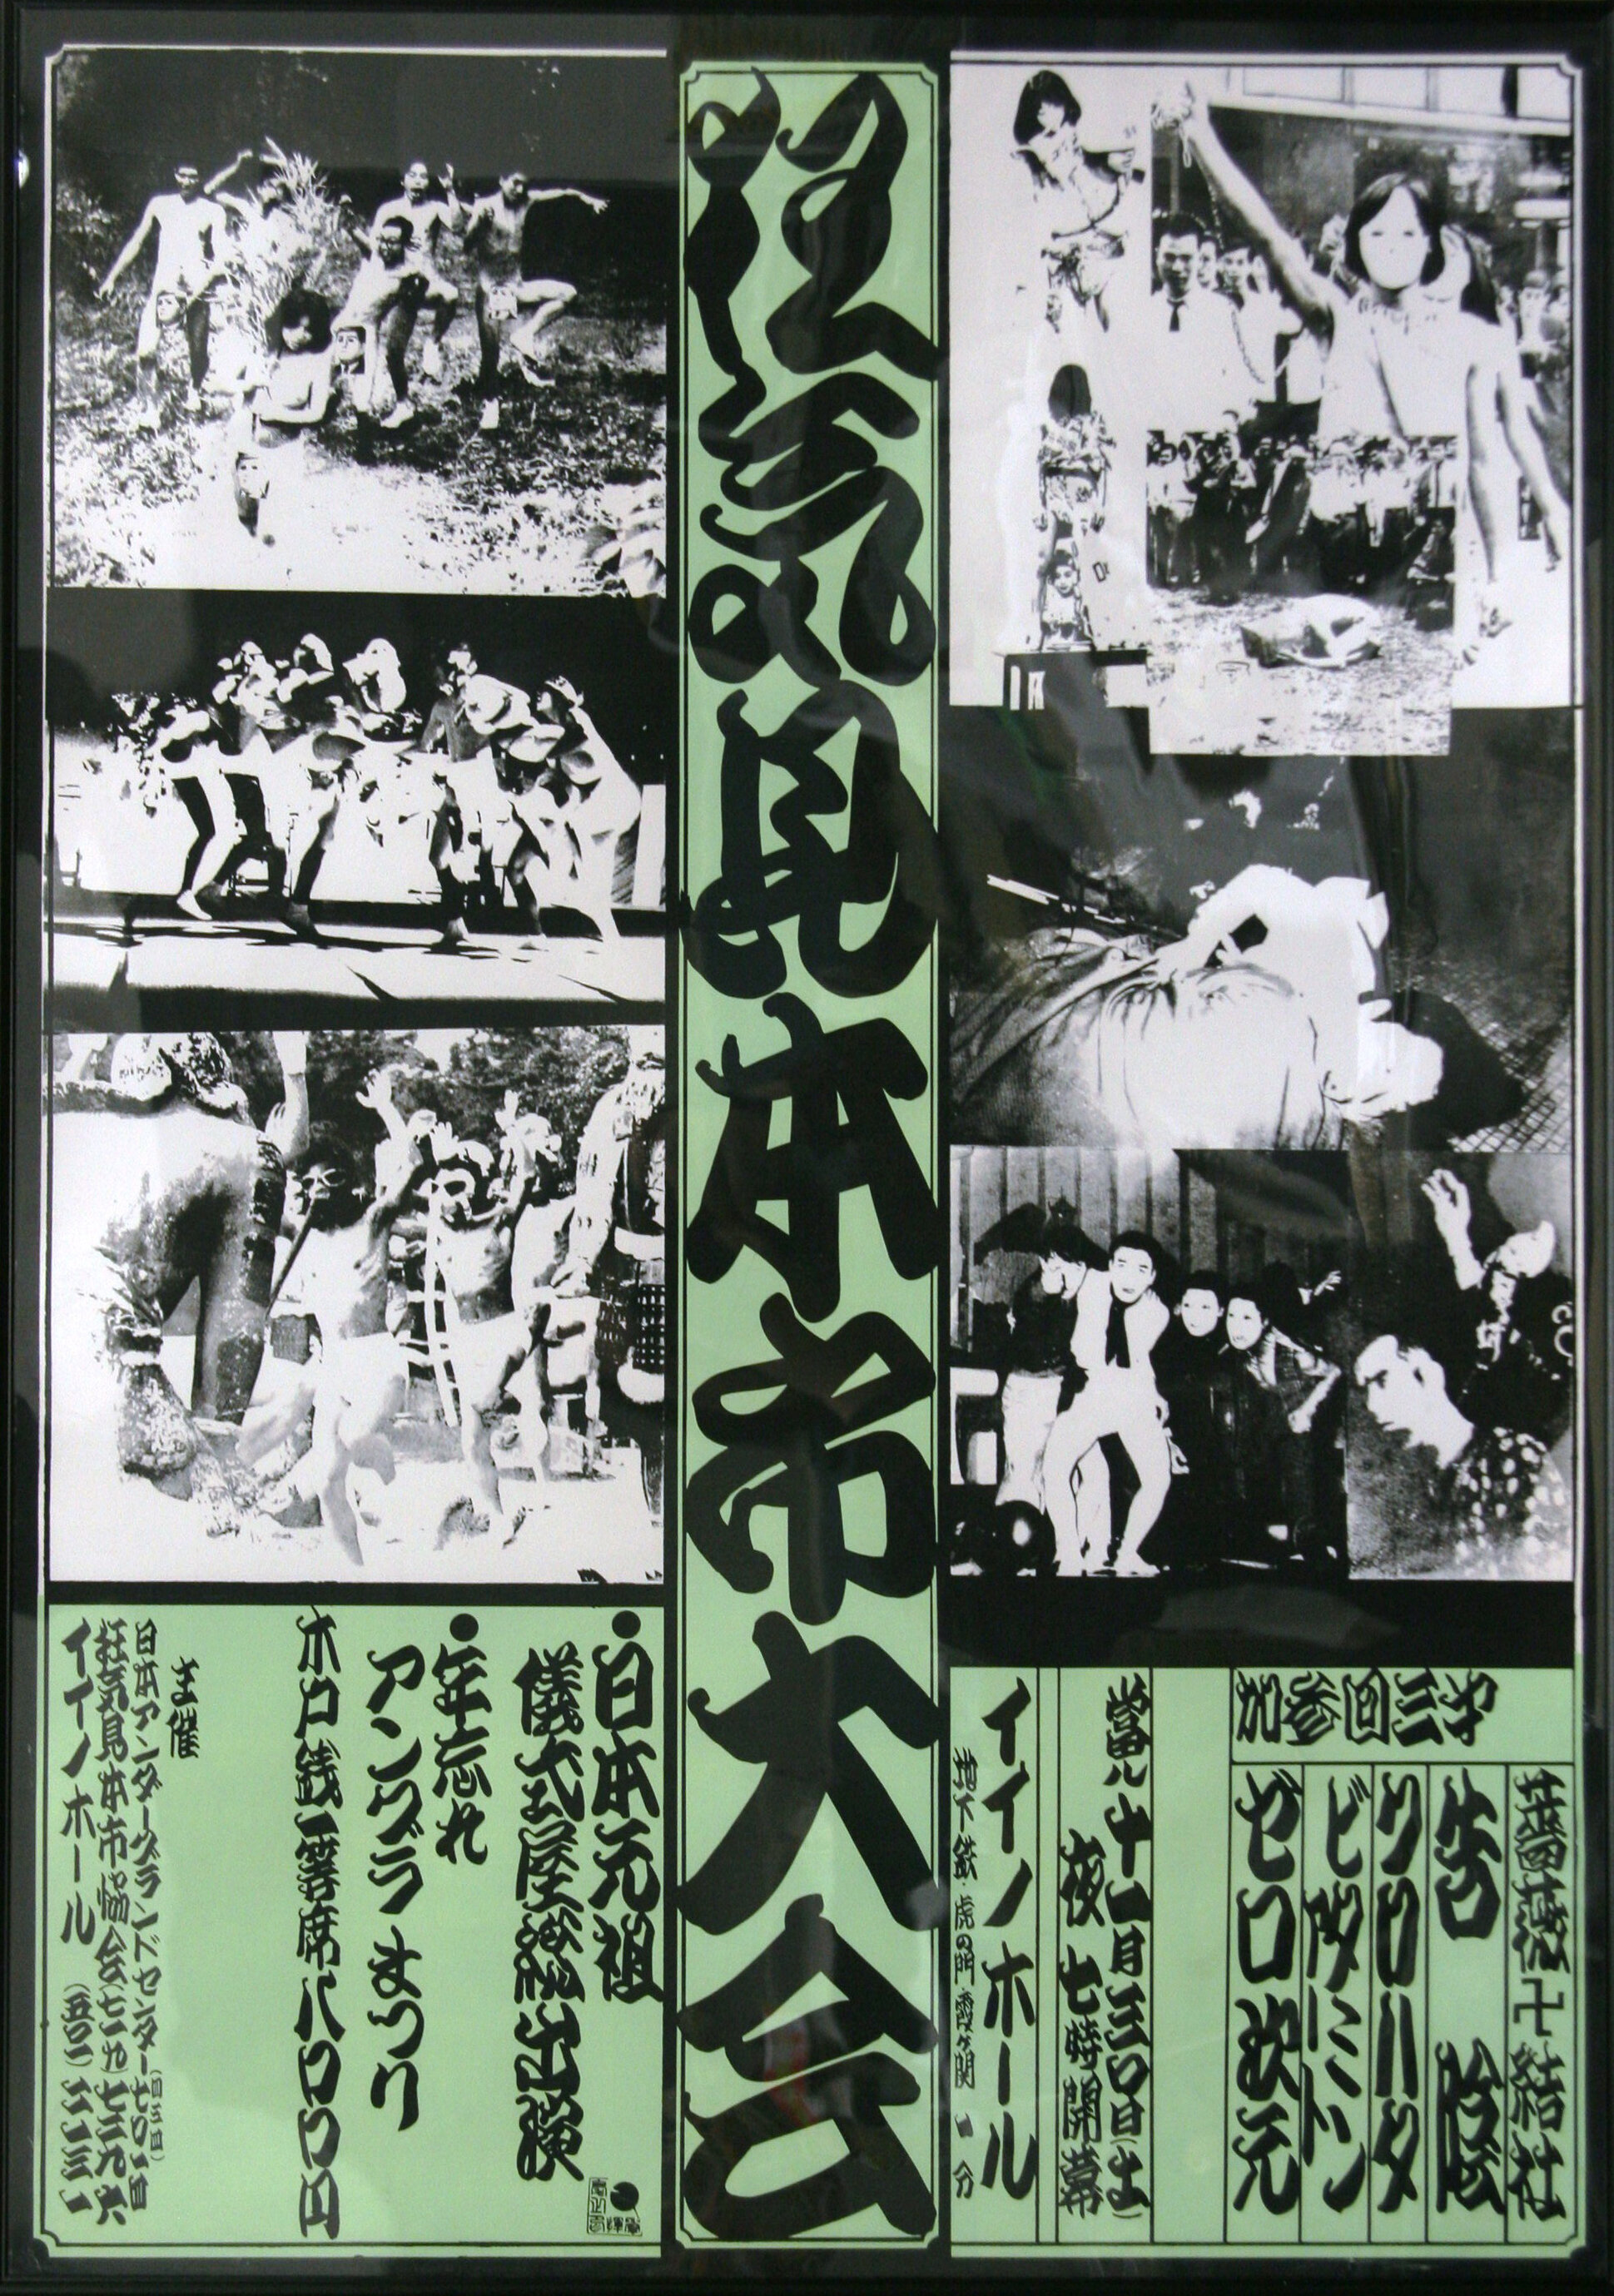  [fig. 7] Poster for  Madness Sample Fair, Year-End Underground Party  at Iino Hall, November 30th, 1968. © Zero Jigen Kato Yoshihirō Archive 